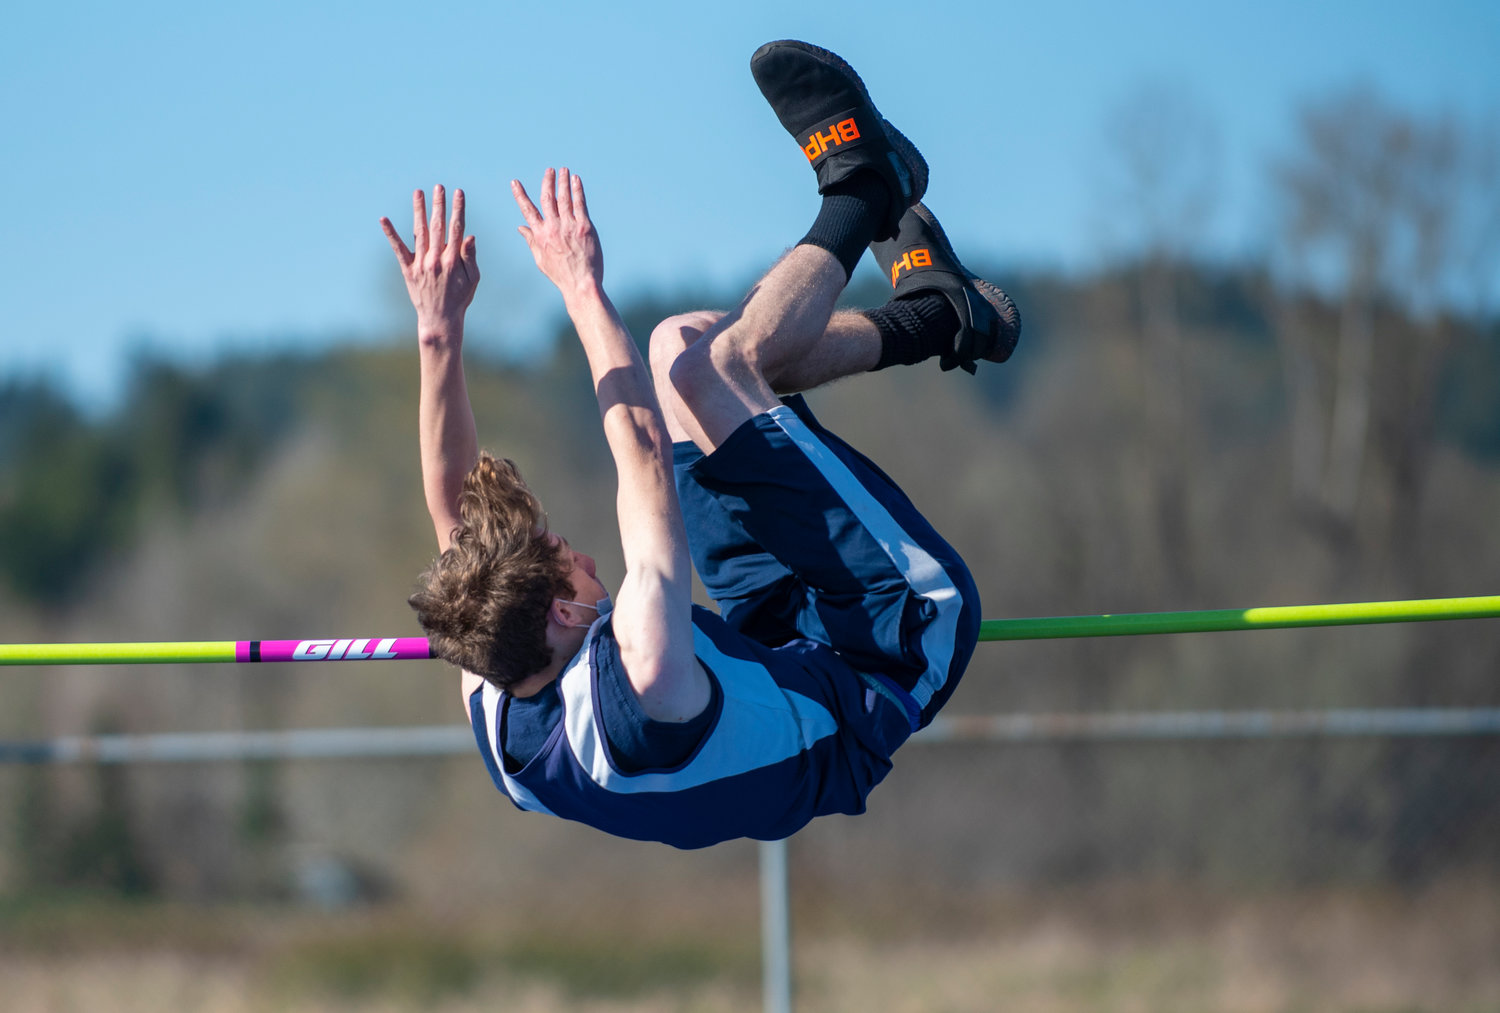 Pe Ell sophomore Jesse Zard placed second in the boys high jump with a leap of 5-02, which he is shown clearing here.